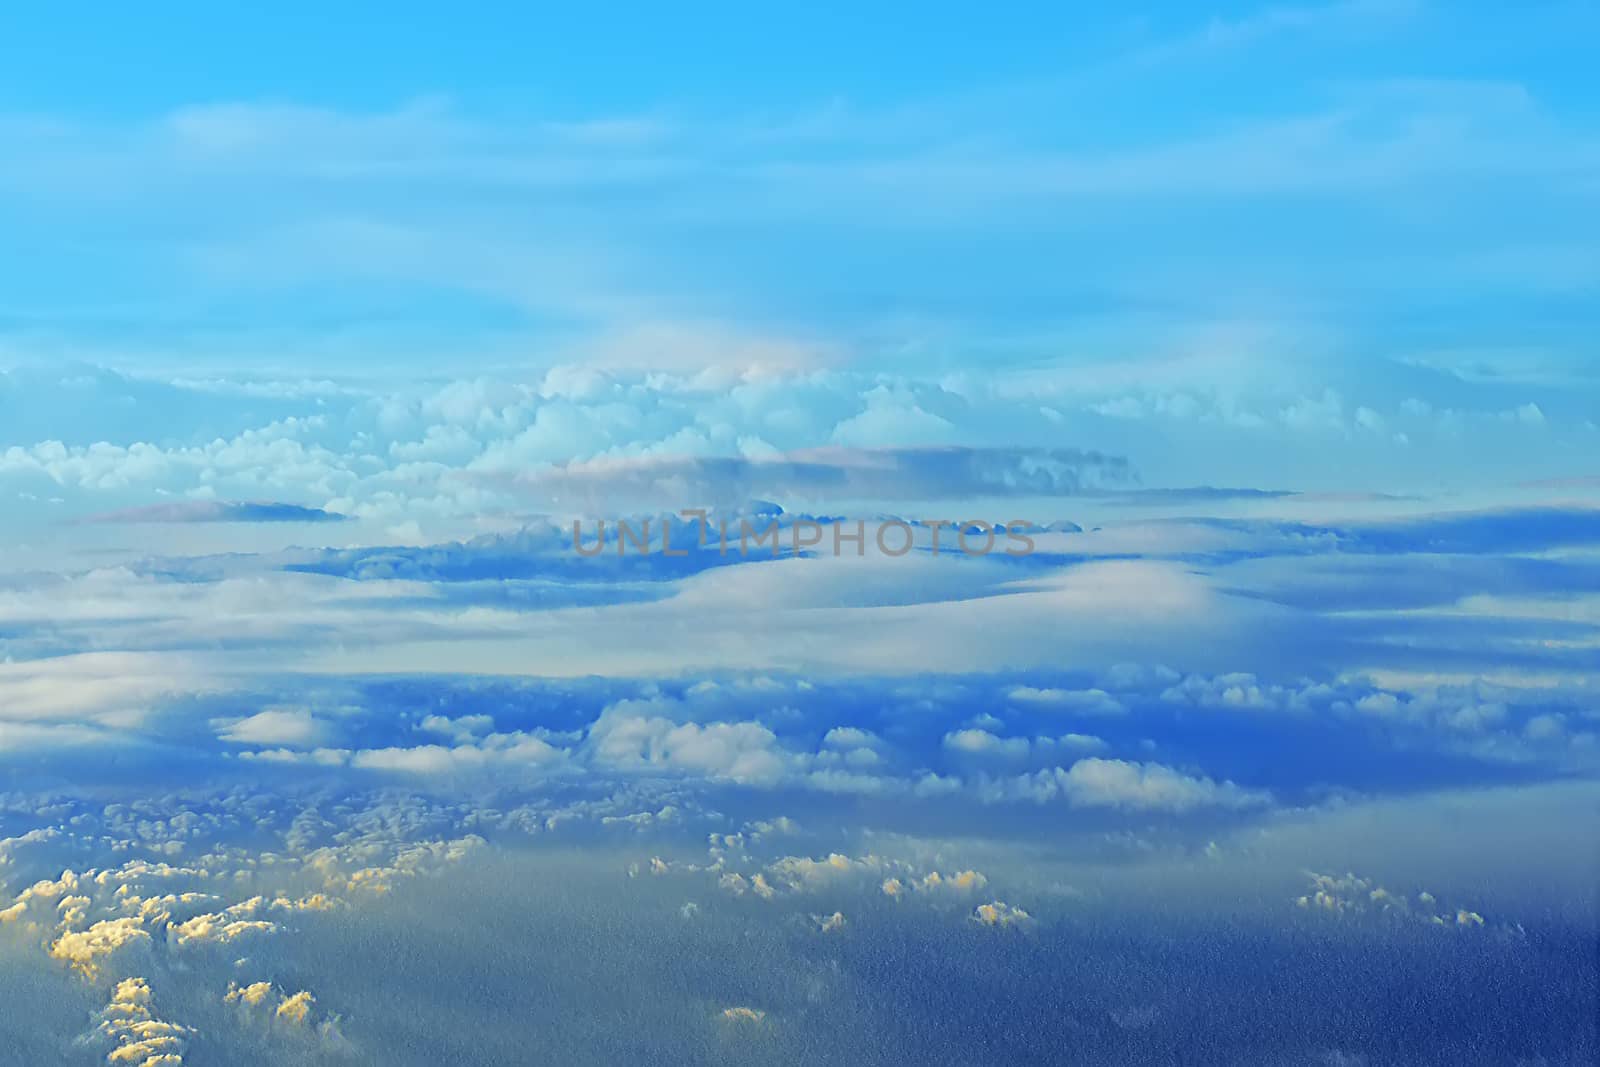 Sky cloud background image by xfdly5